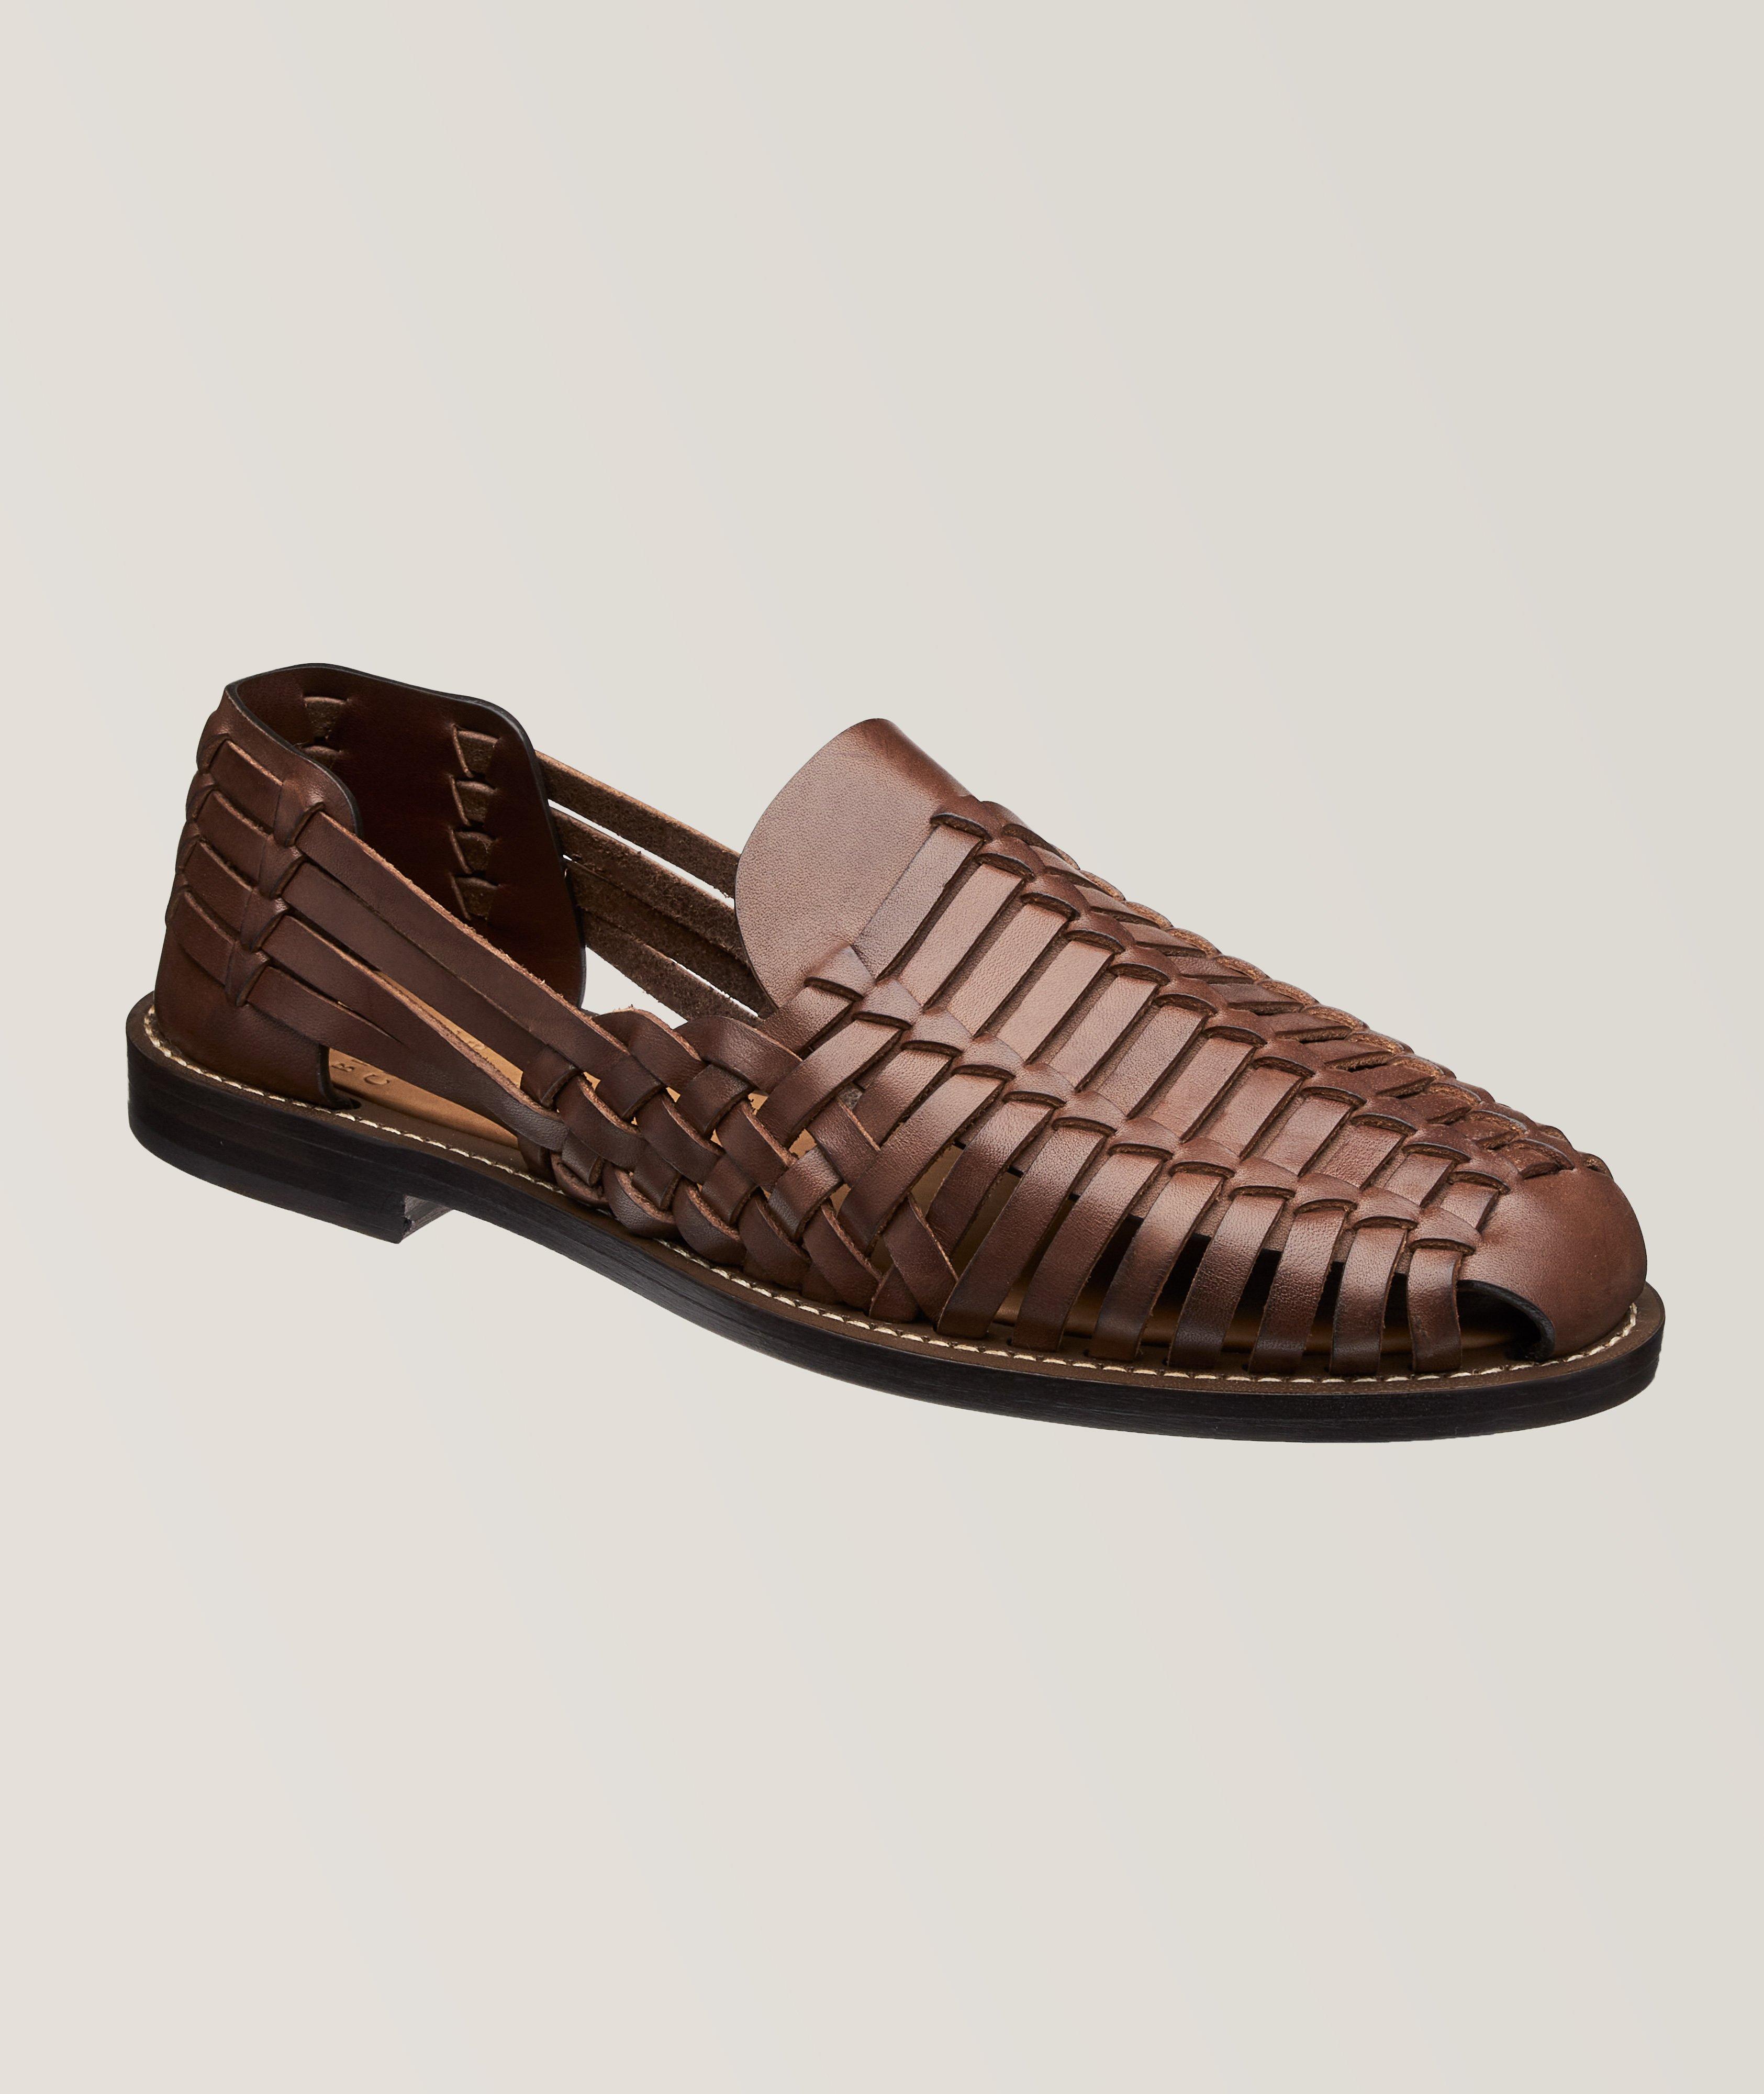 Woven Leather Fisherman Sandals  image 0